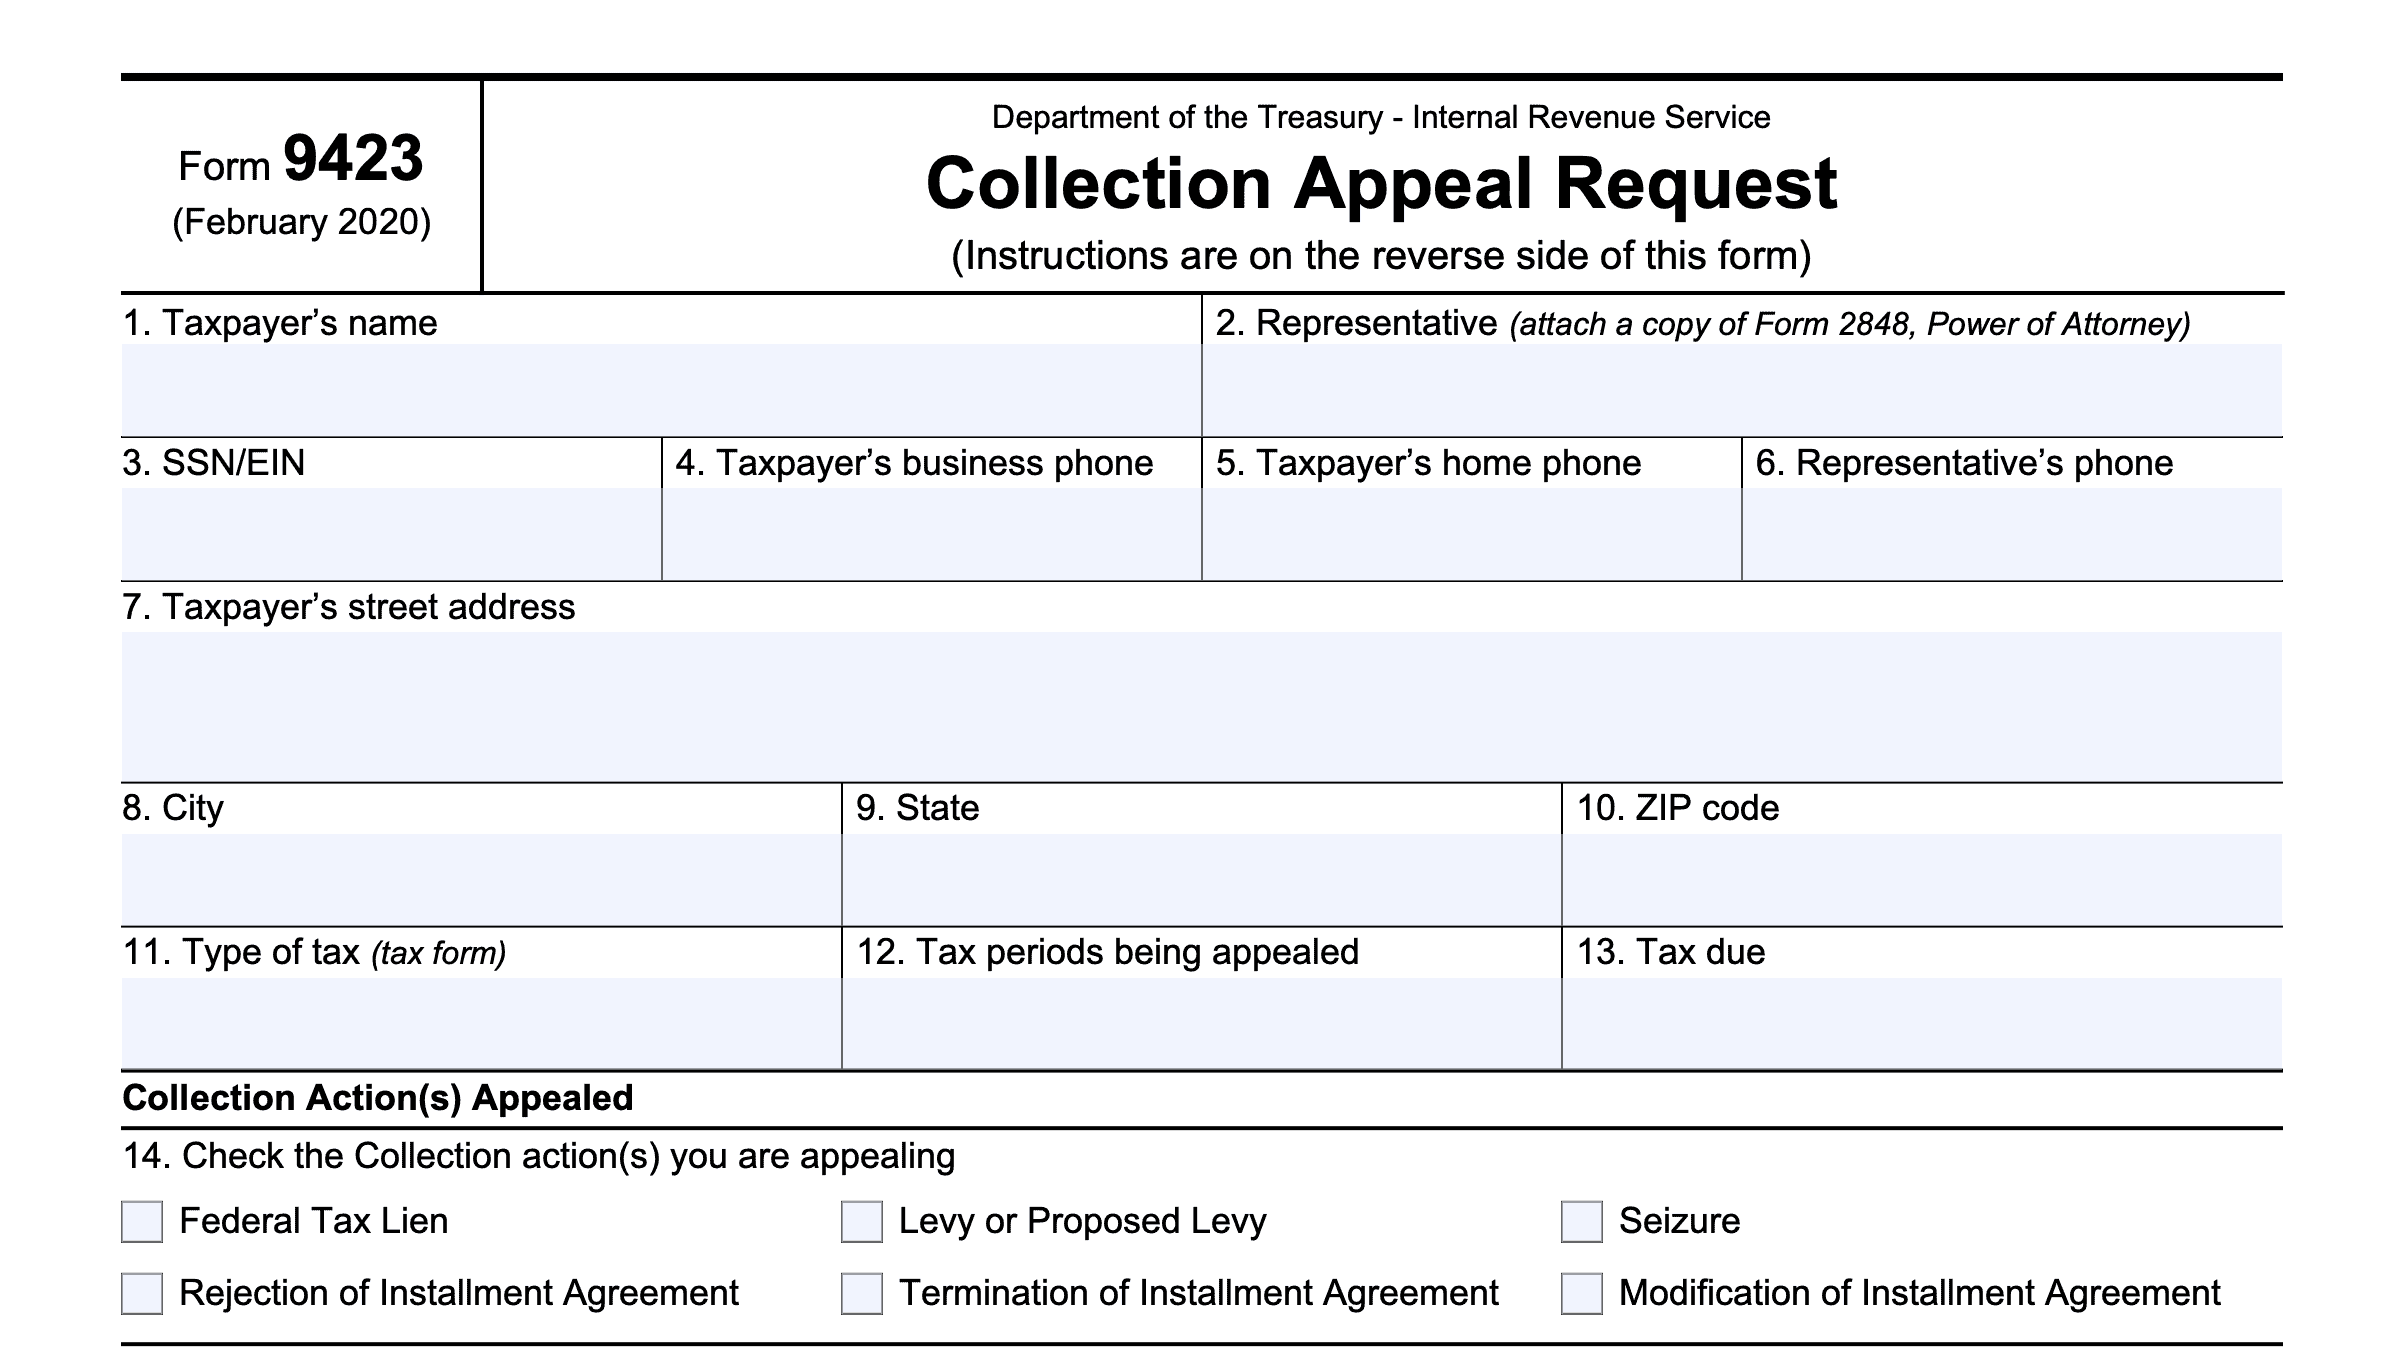 irs-form-9423-instructions-your-collection-appeal-request